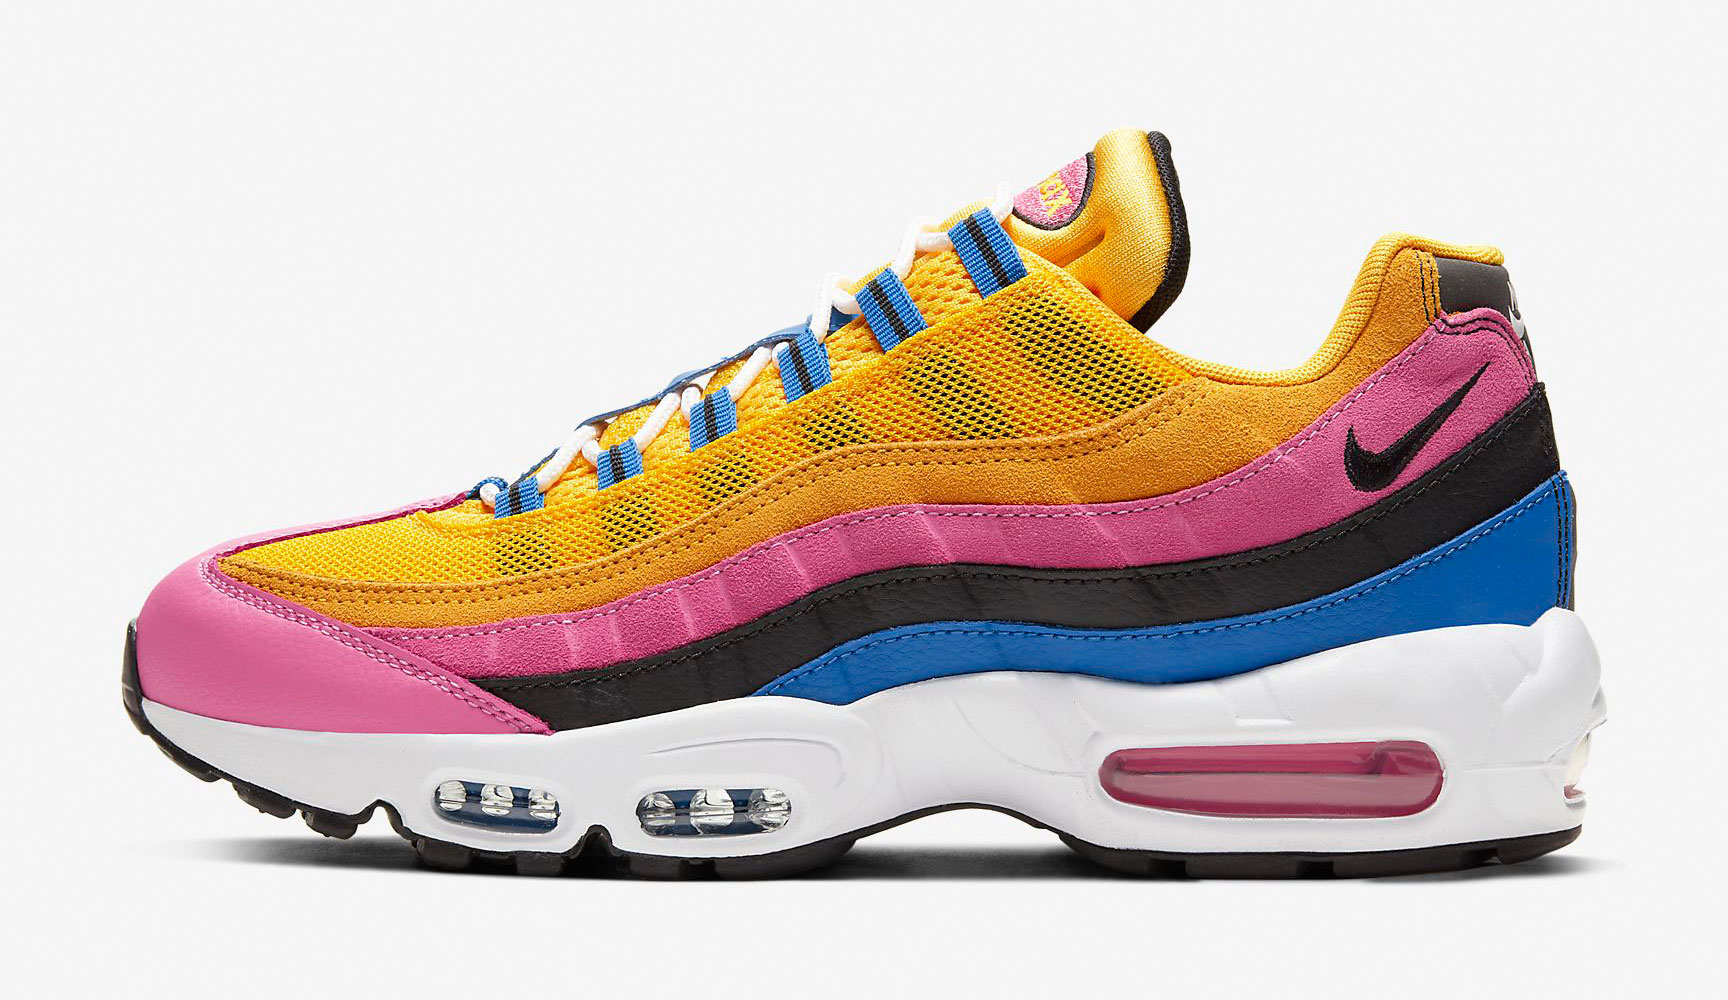 nike-air-max-95-university-gold-pinksicle-release-date